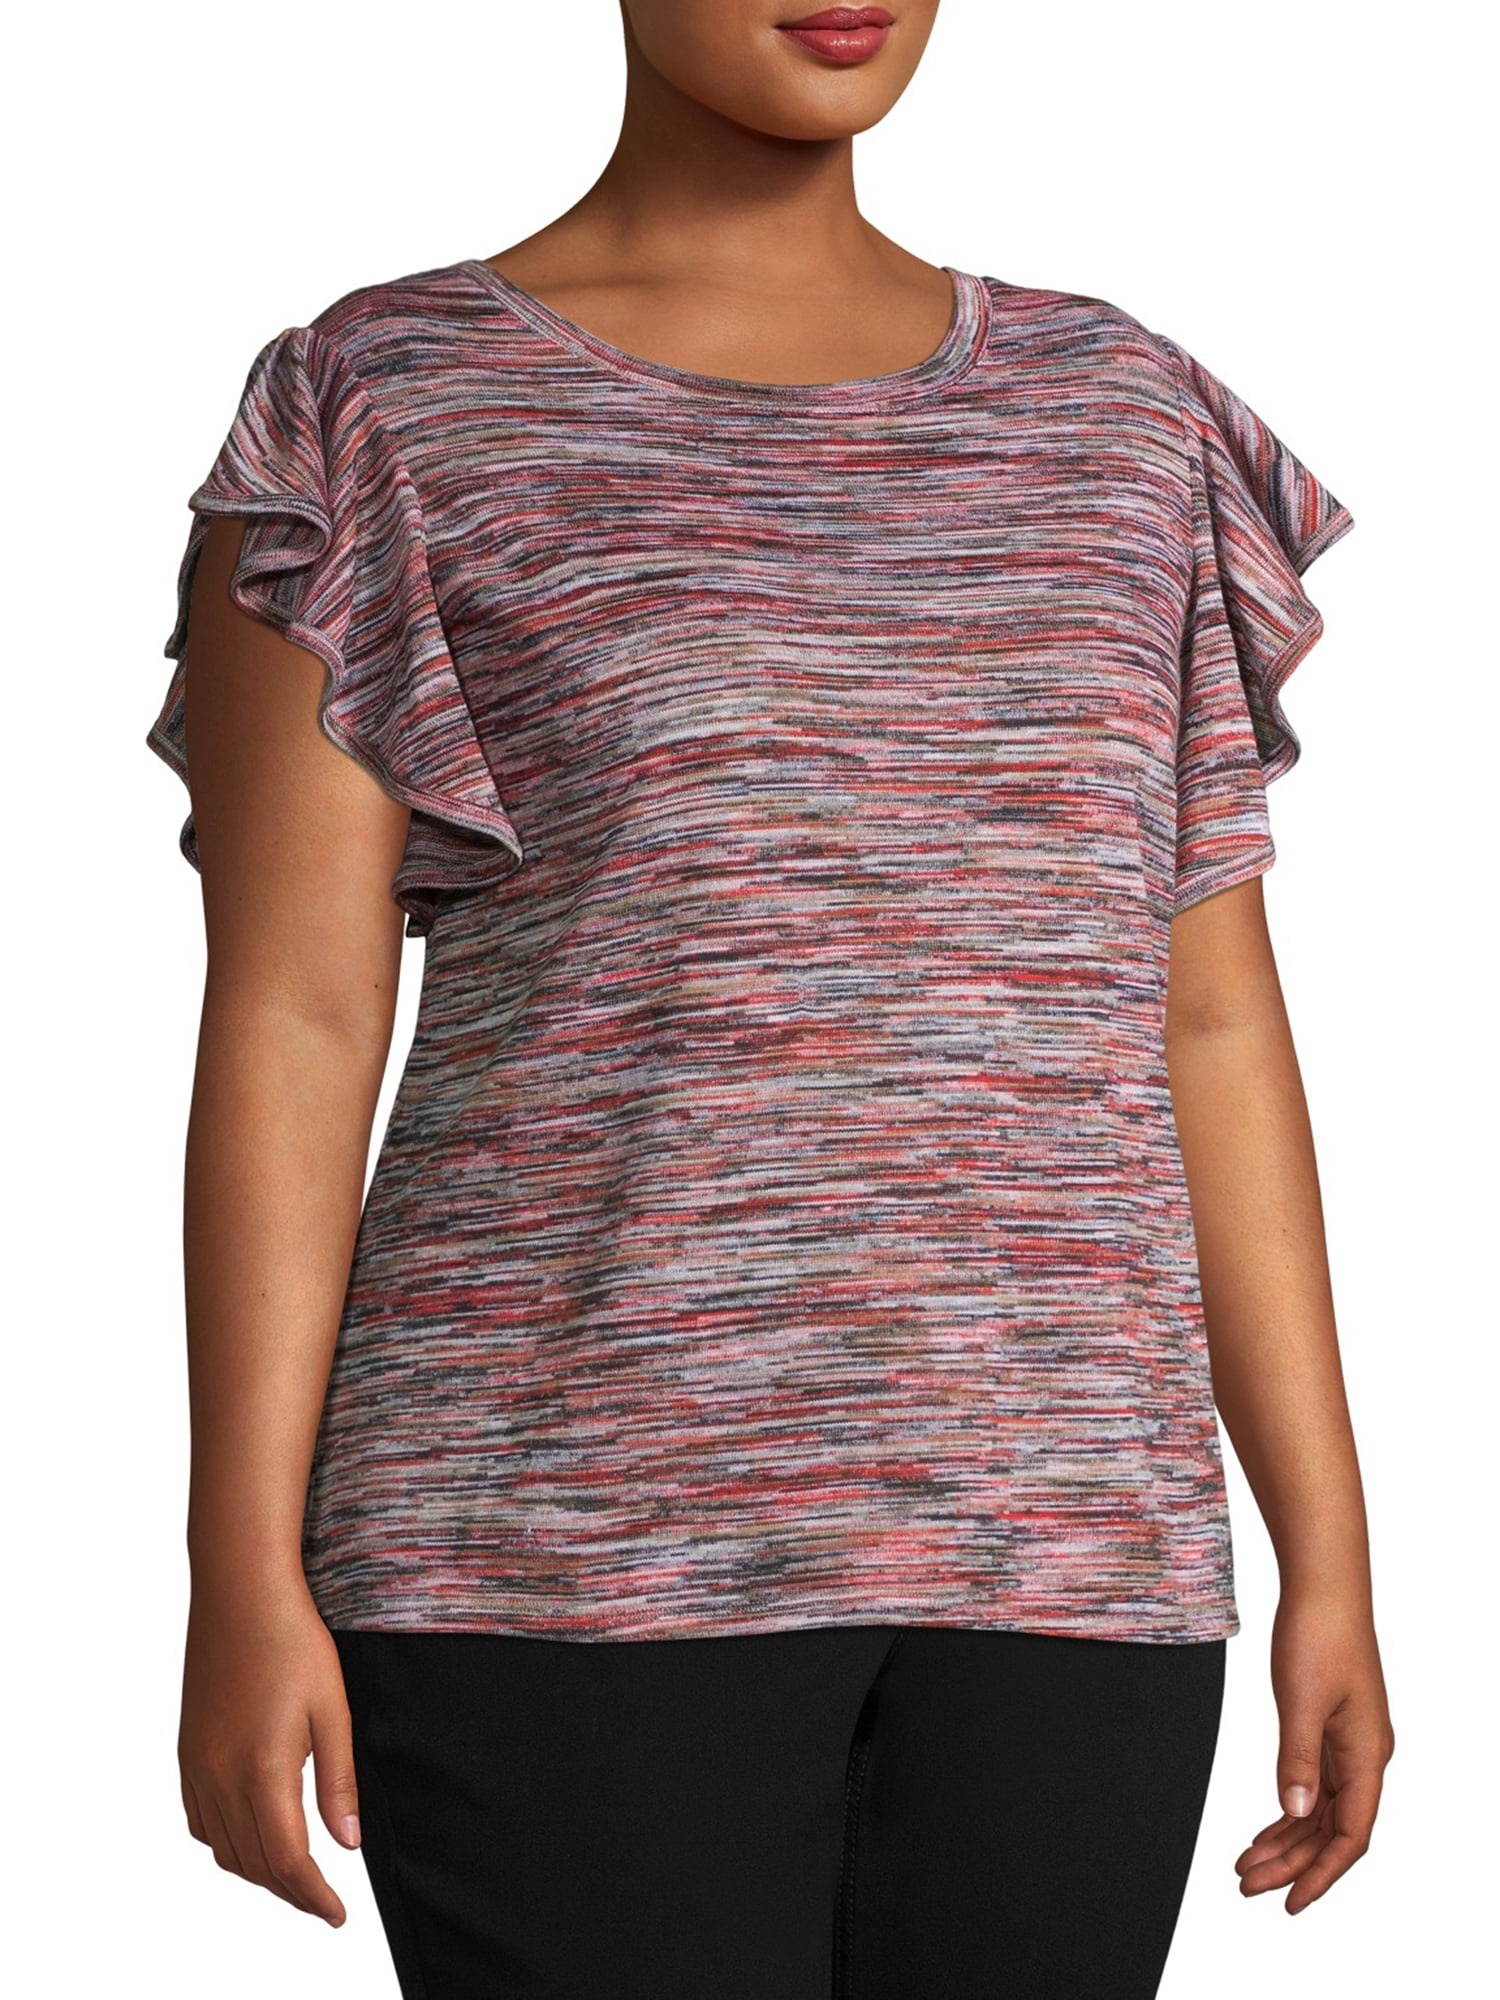 Plus Women's Wonder Space-Dye Top with Ring Neck